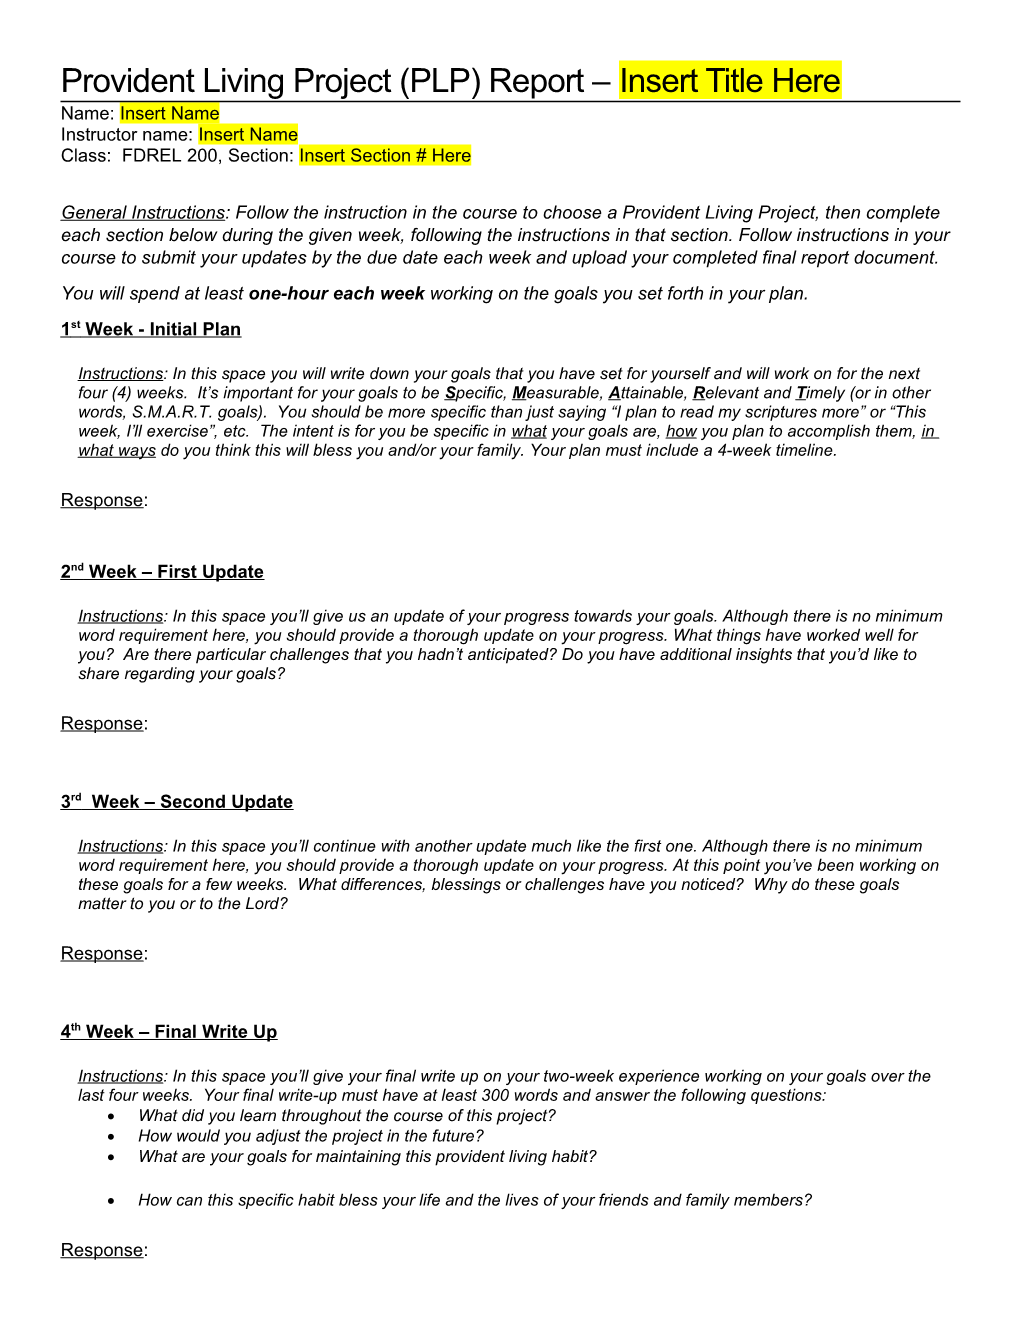 Provident Living Project(PLP) Report Insert Title Here